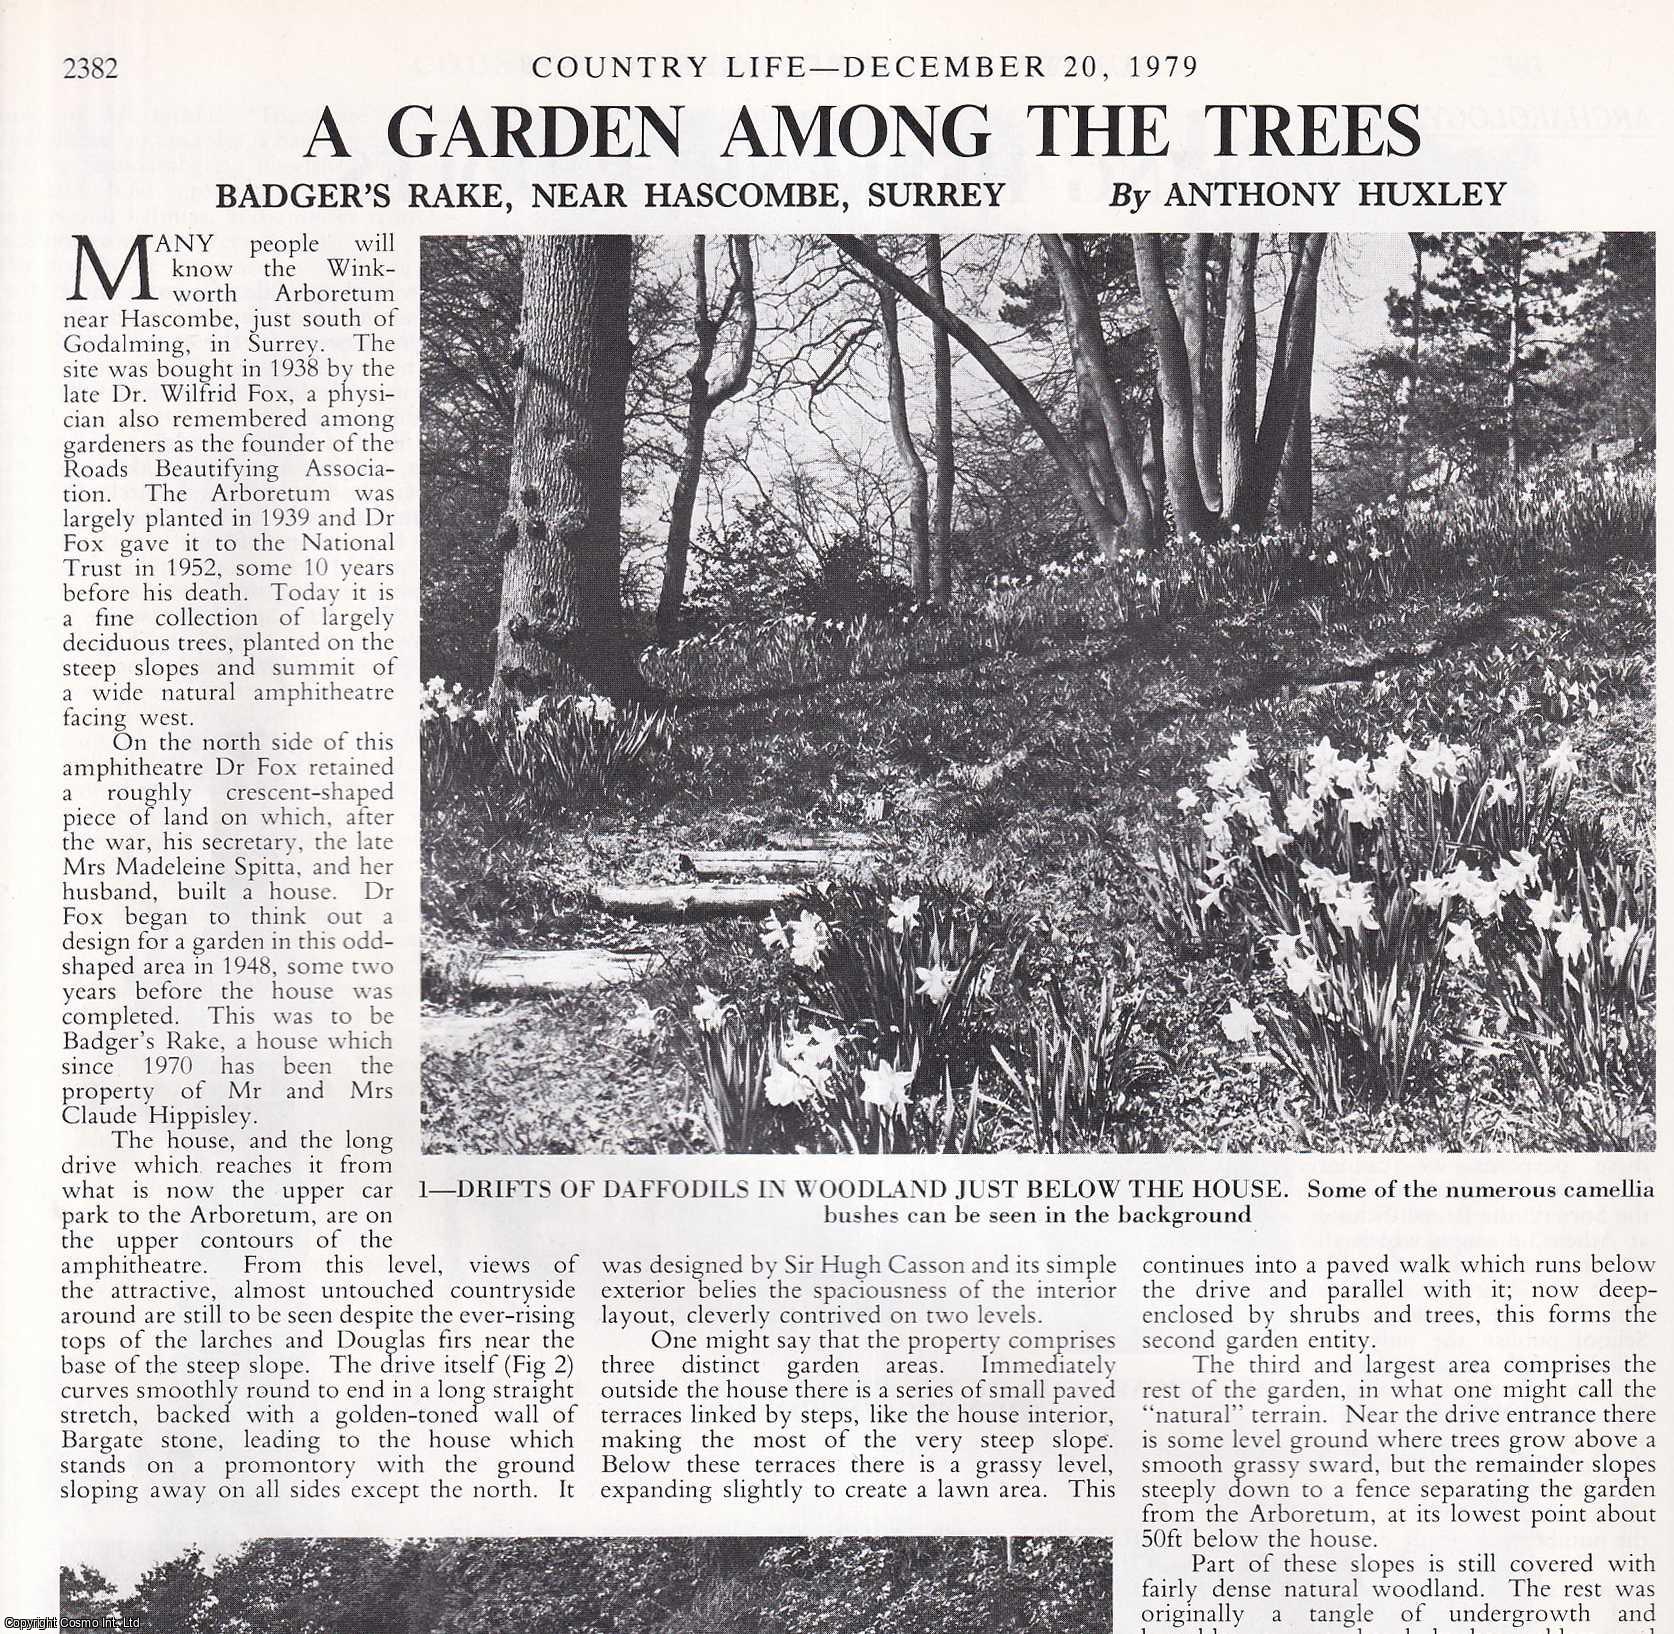 Anthony Huxley - The Garden of Badger's Rake, near Hascombe, Surrey. Several pictures and accompanying text, removed from an original issue of Country Life Magazine, 1979.